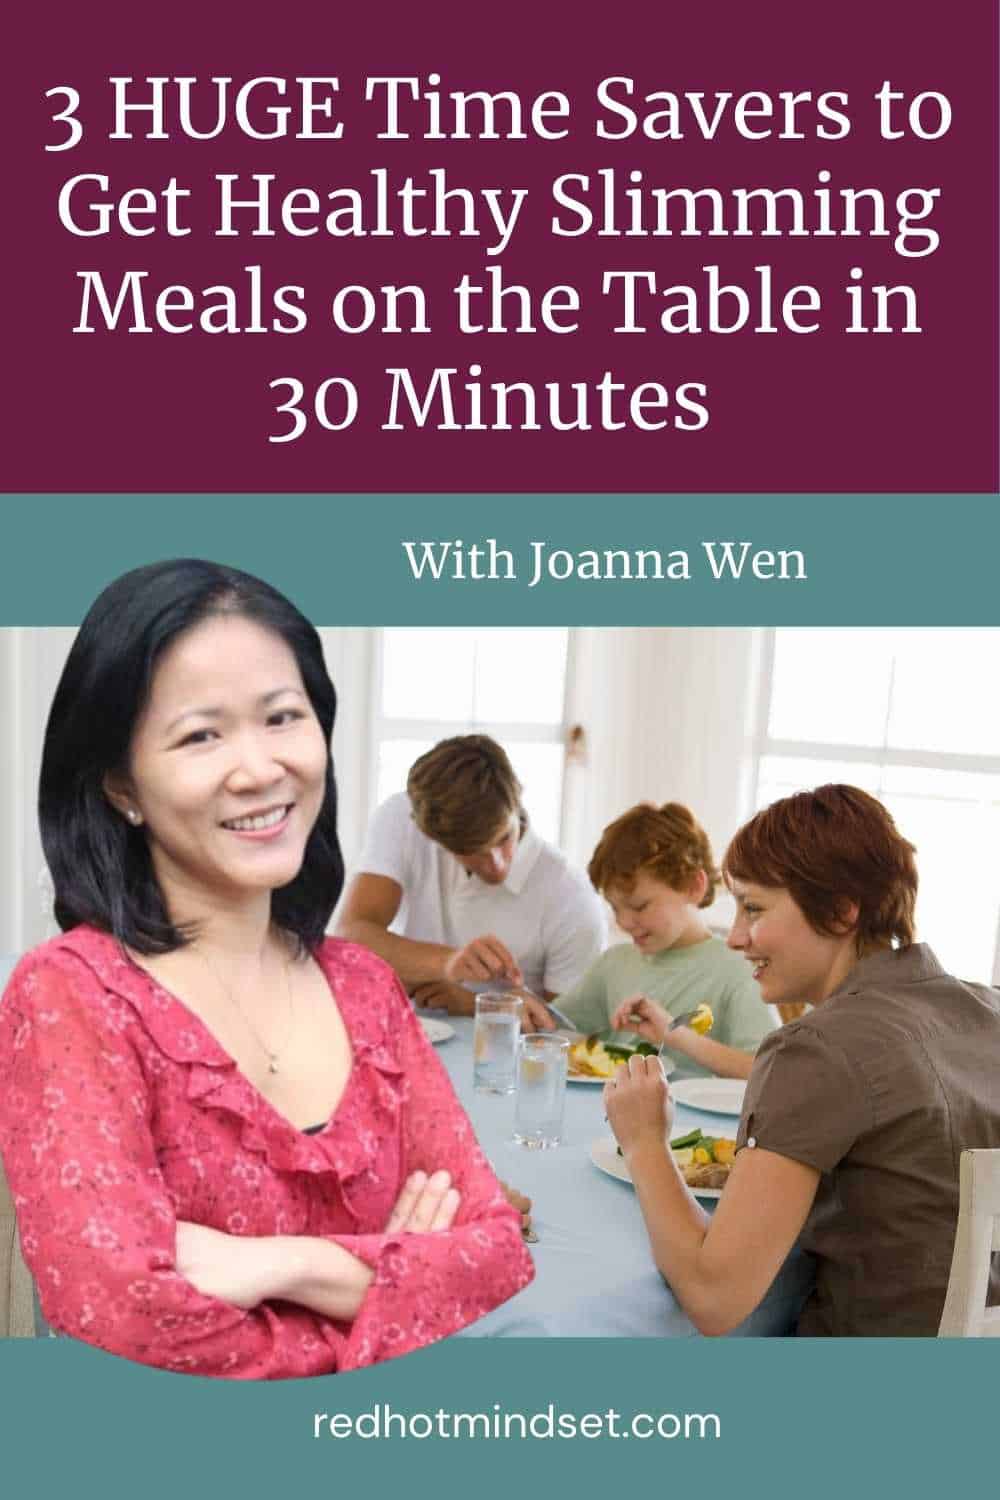 Ep 164 | 3 HUGE Time Savers to Get Healthy Slimming Meals on the Table in 30 Minutes (so you have time for your goals) Interview with Joanna Wen